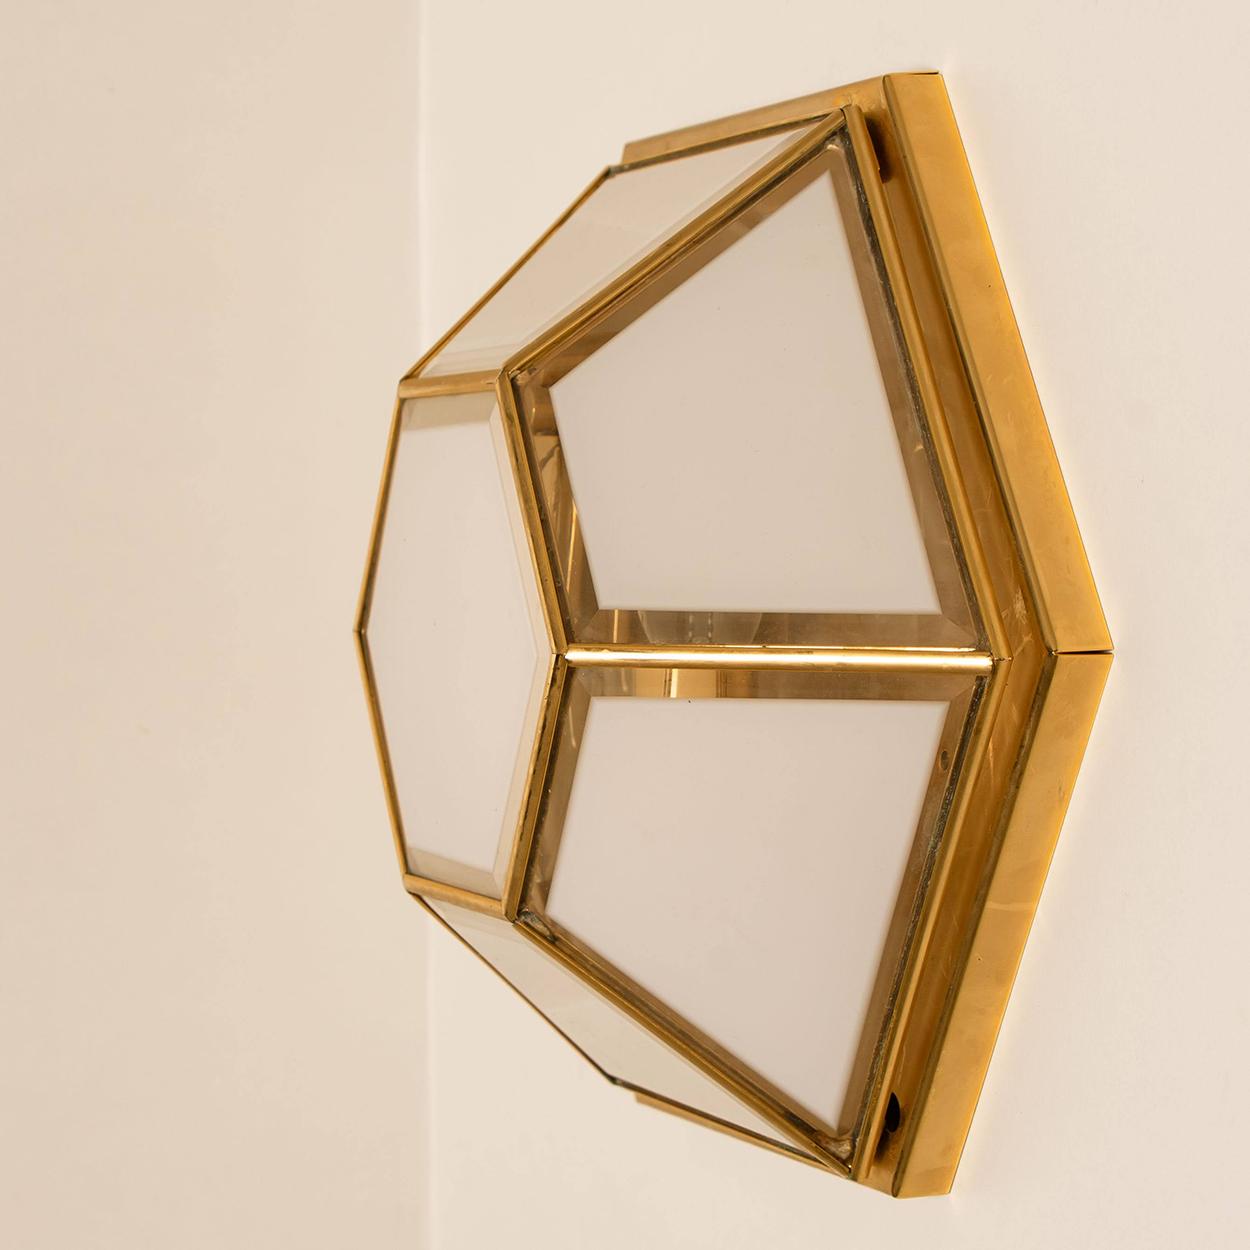 This beautiful and unique octagonal pair of glass light flush mounts or wall lights were manufactured by Glashütte Limburg in Germany during the 1970s, (early 1970s). Nice craftsmanship. Minimal, geometric and simply shaped design. White glass with